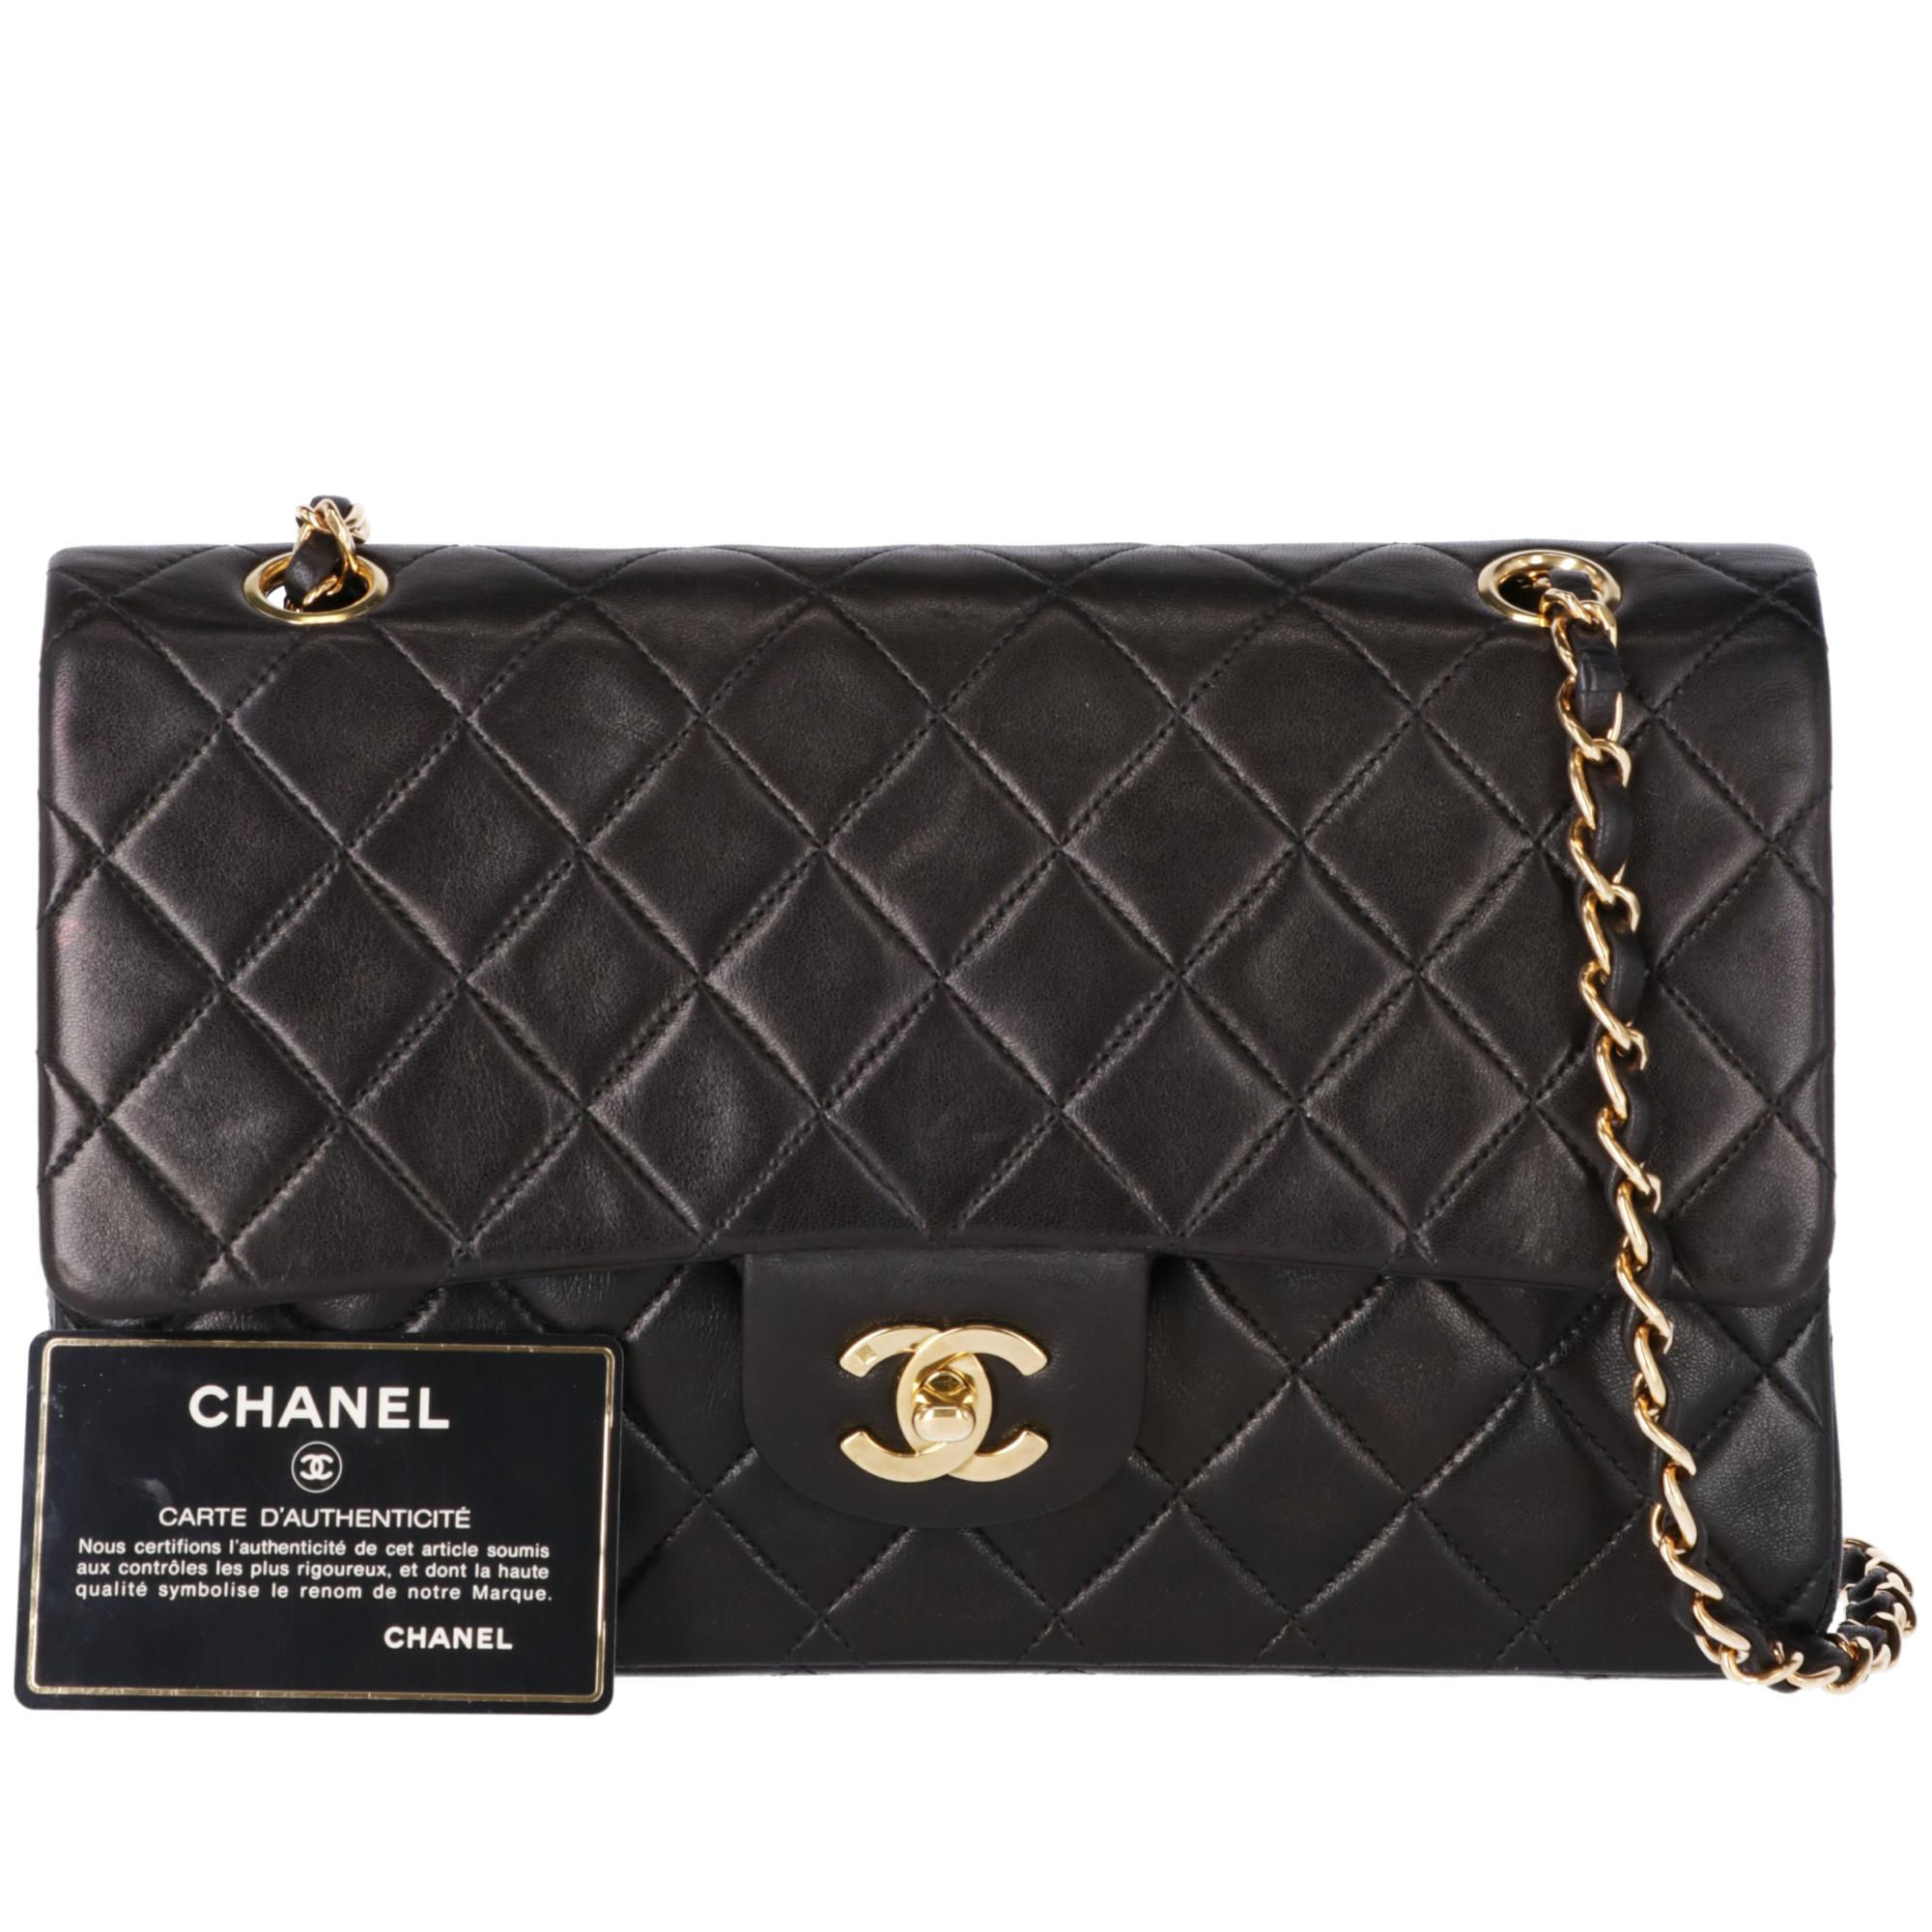 1990s Chanel 2.55 Black Leather Bag 25 cm With Chain 9